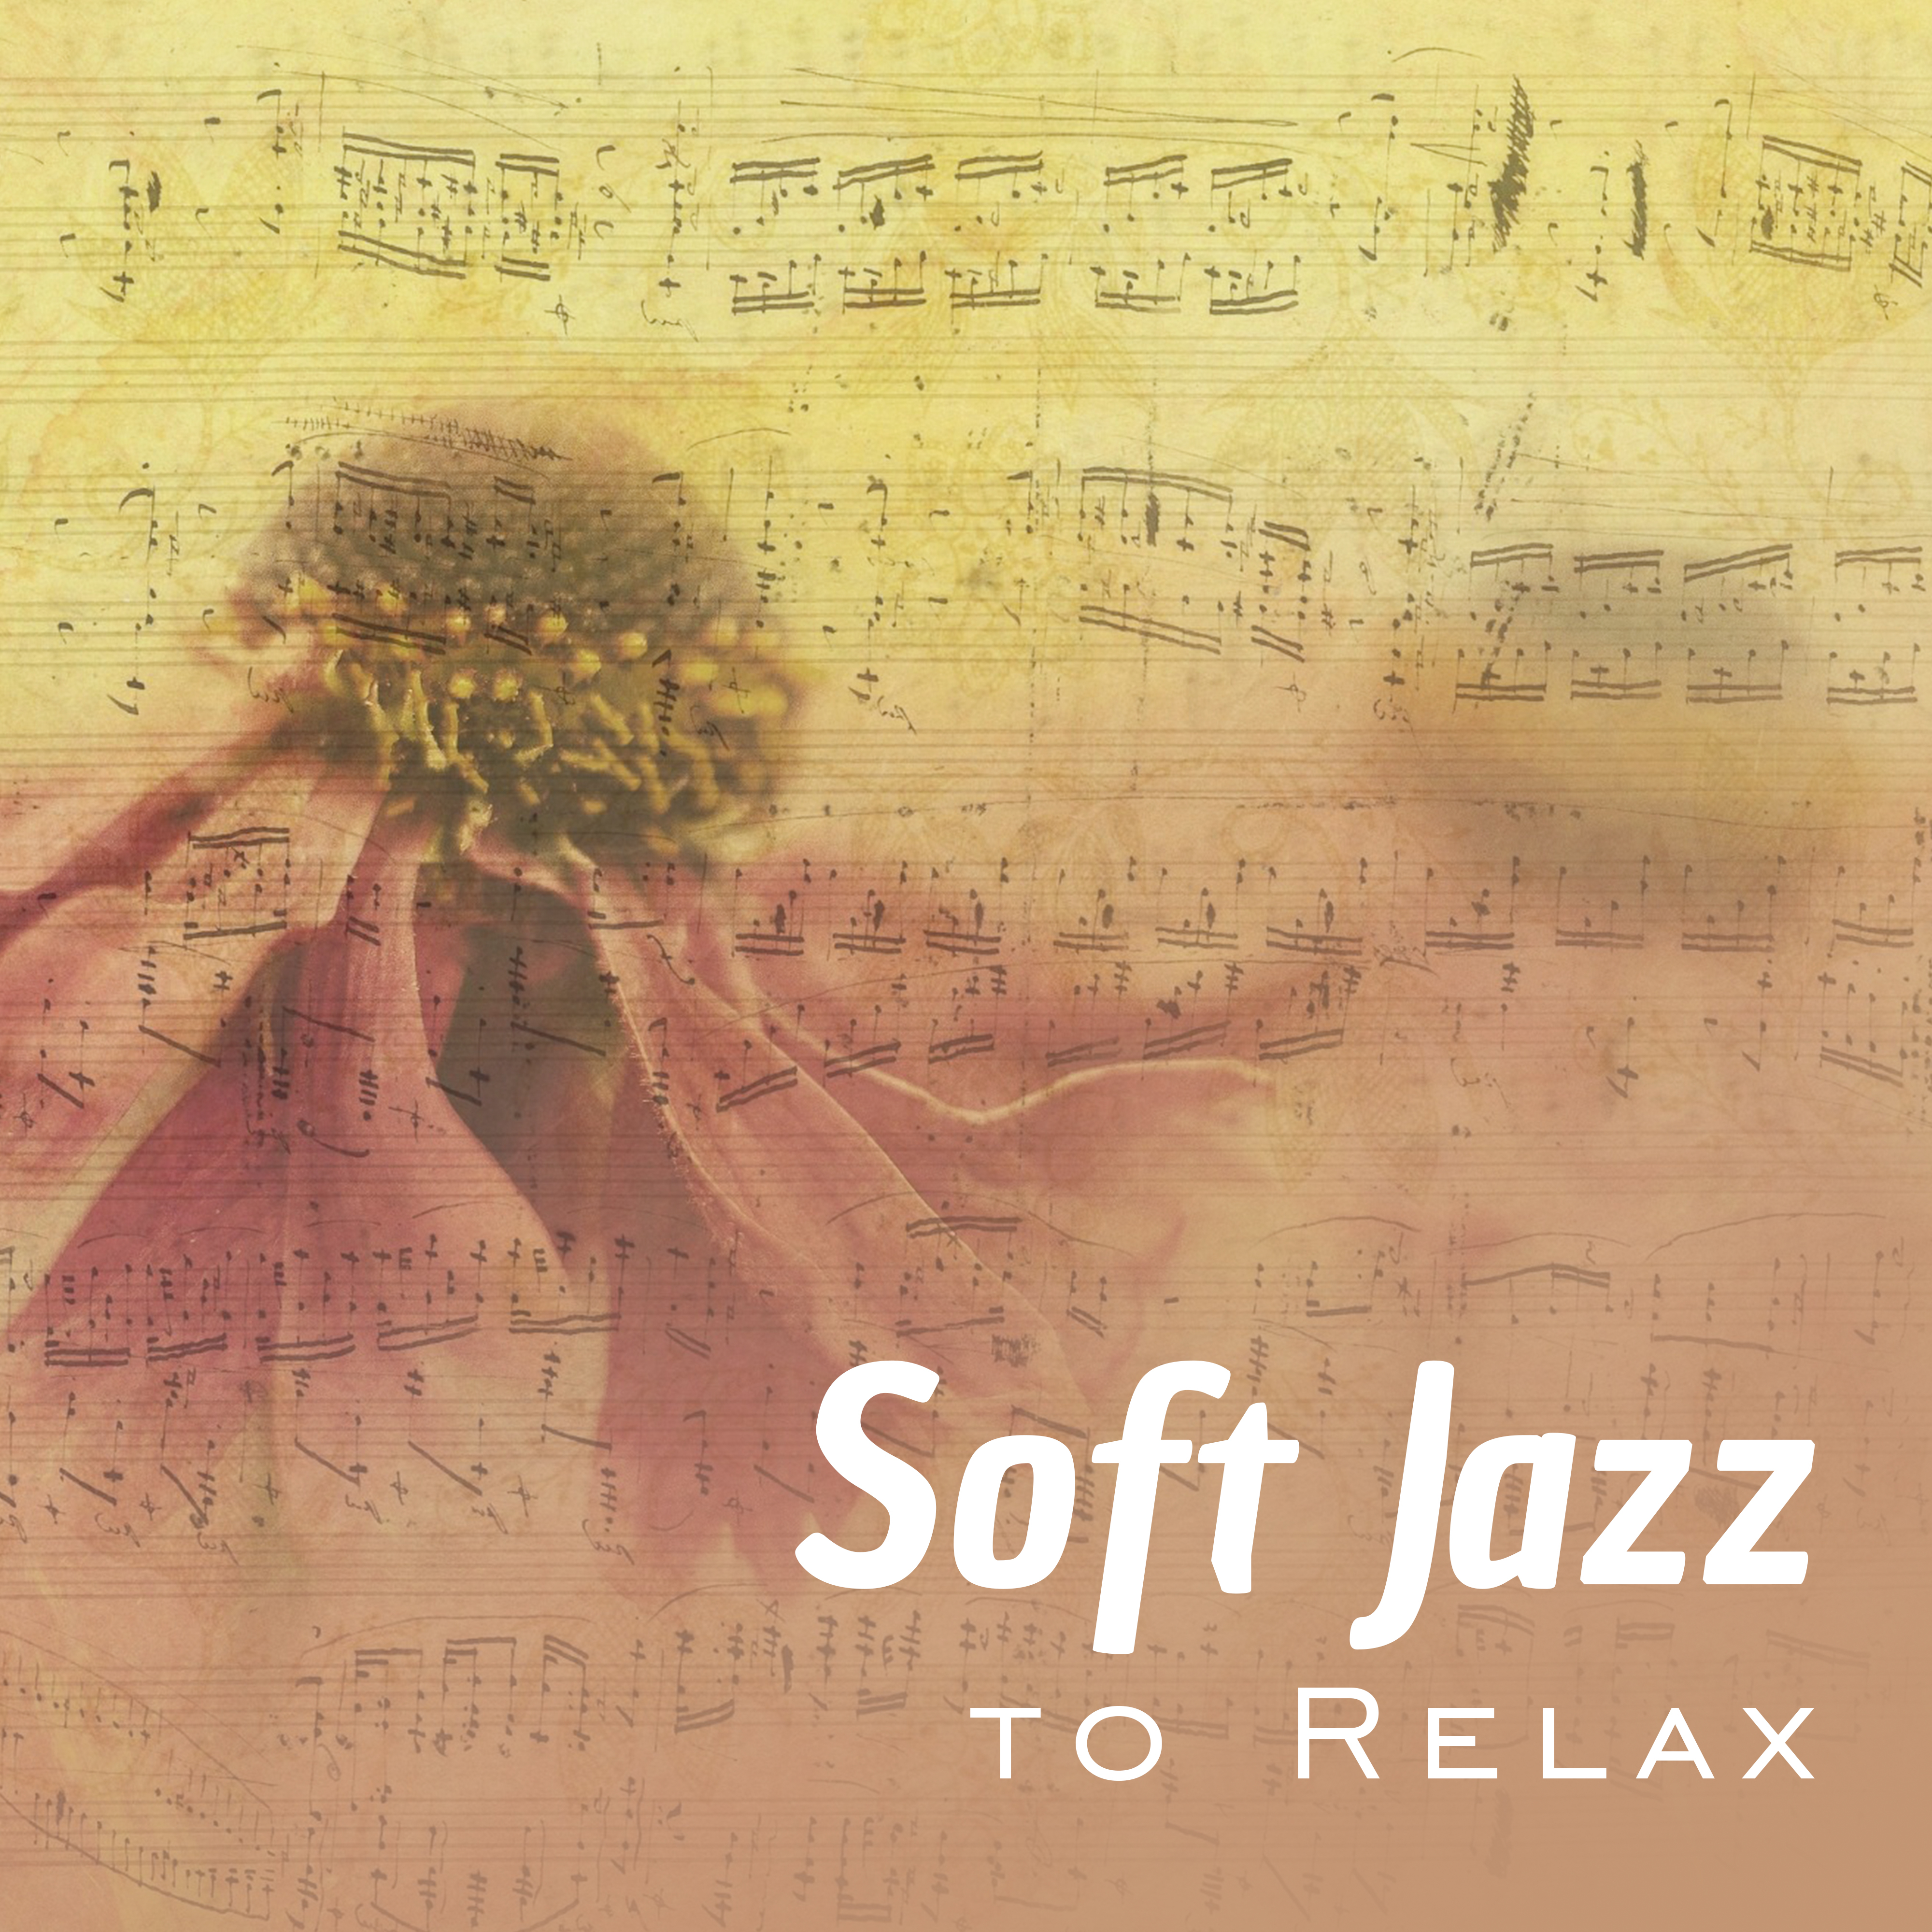 Soft Jazz to Relax  Evening Smooth Jazz, Music to Calm Down, Easy Listening, Best Background Music to Rest